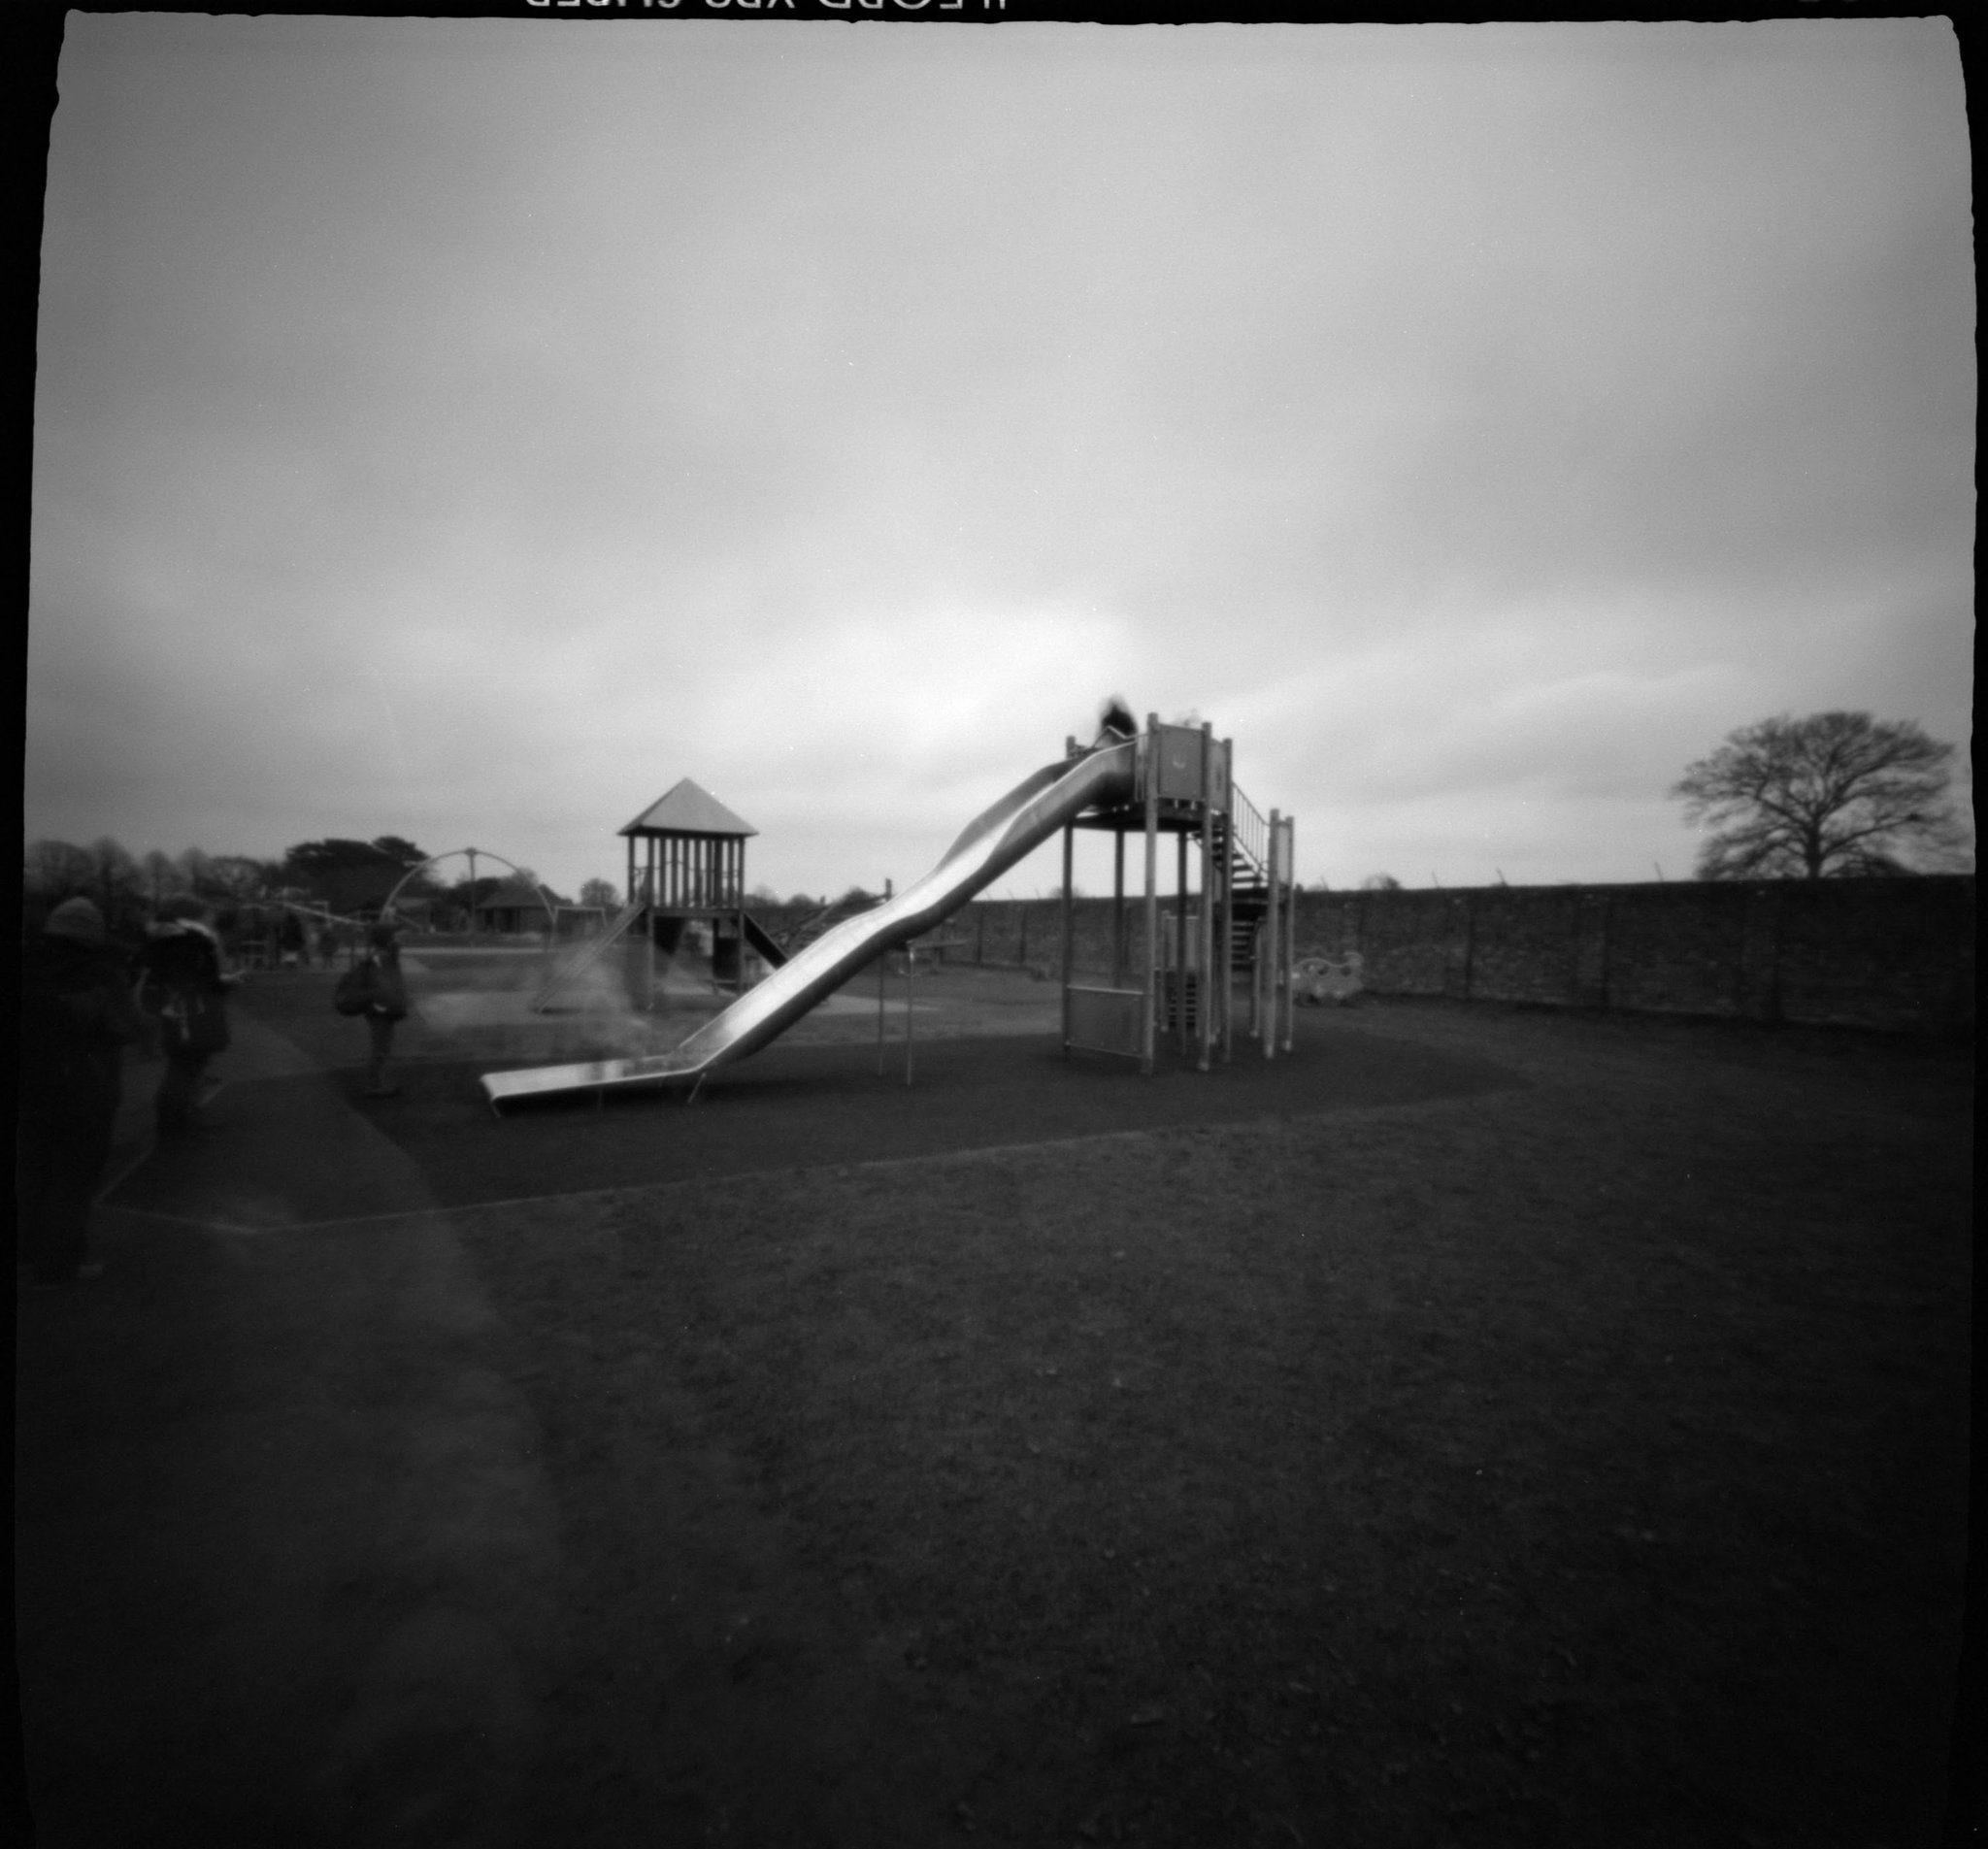 Pinhole image of a slide in a park